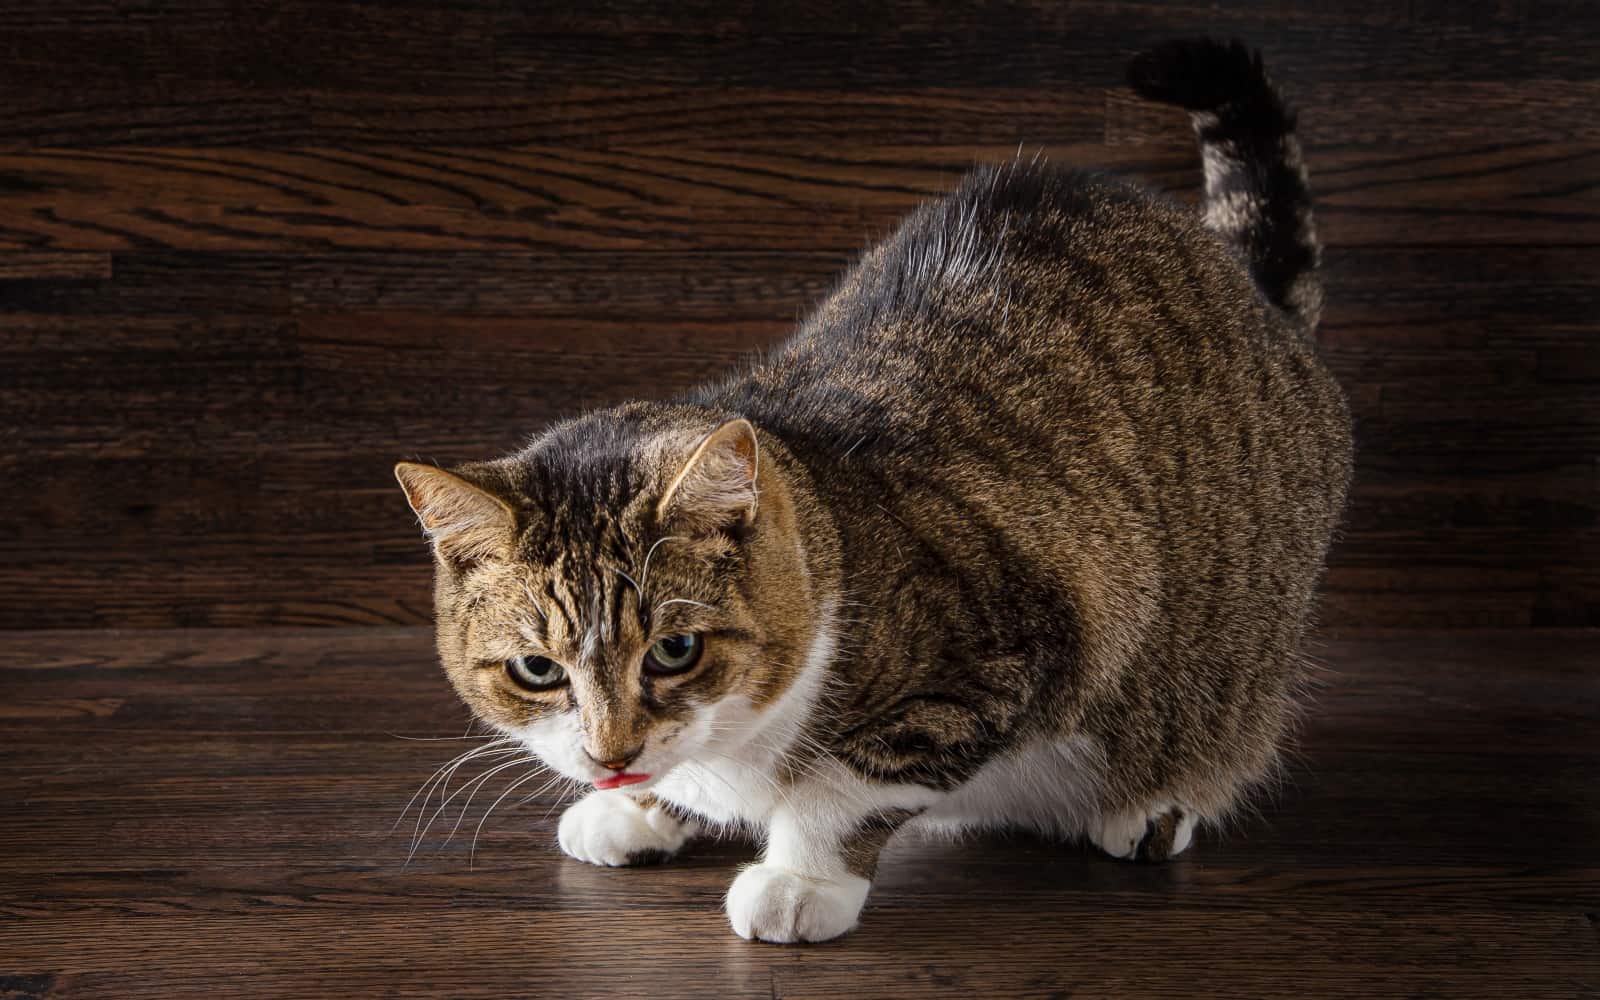 Why Does My Cat Lick The Floor? (6 Reasons + When to Worry)